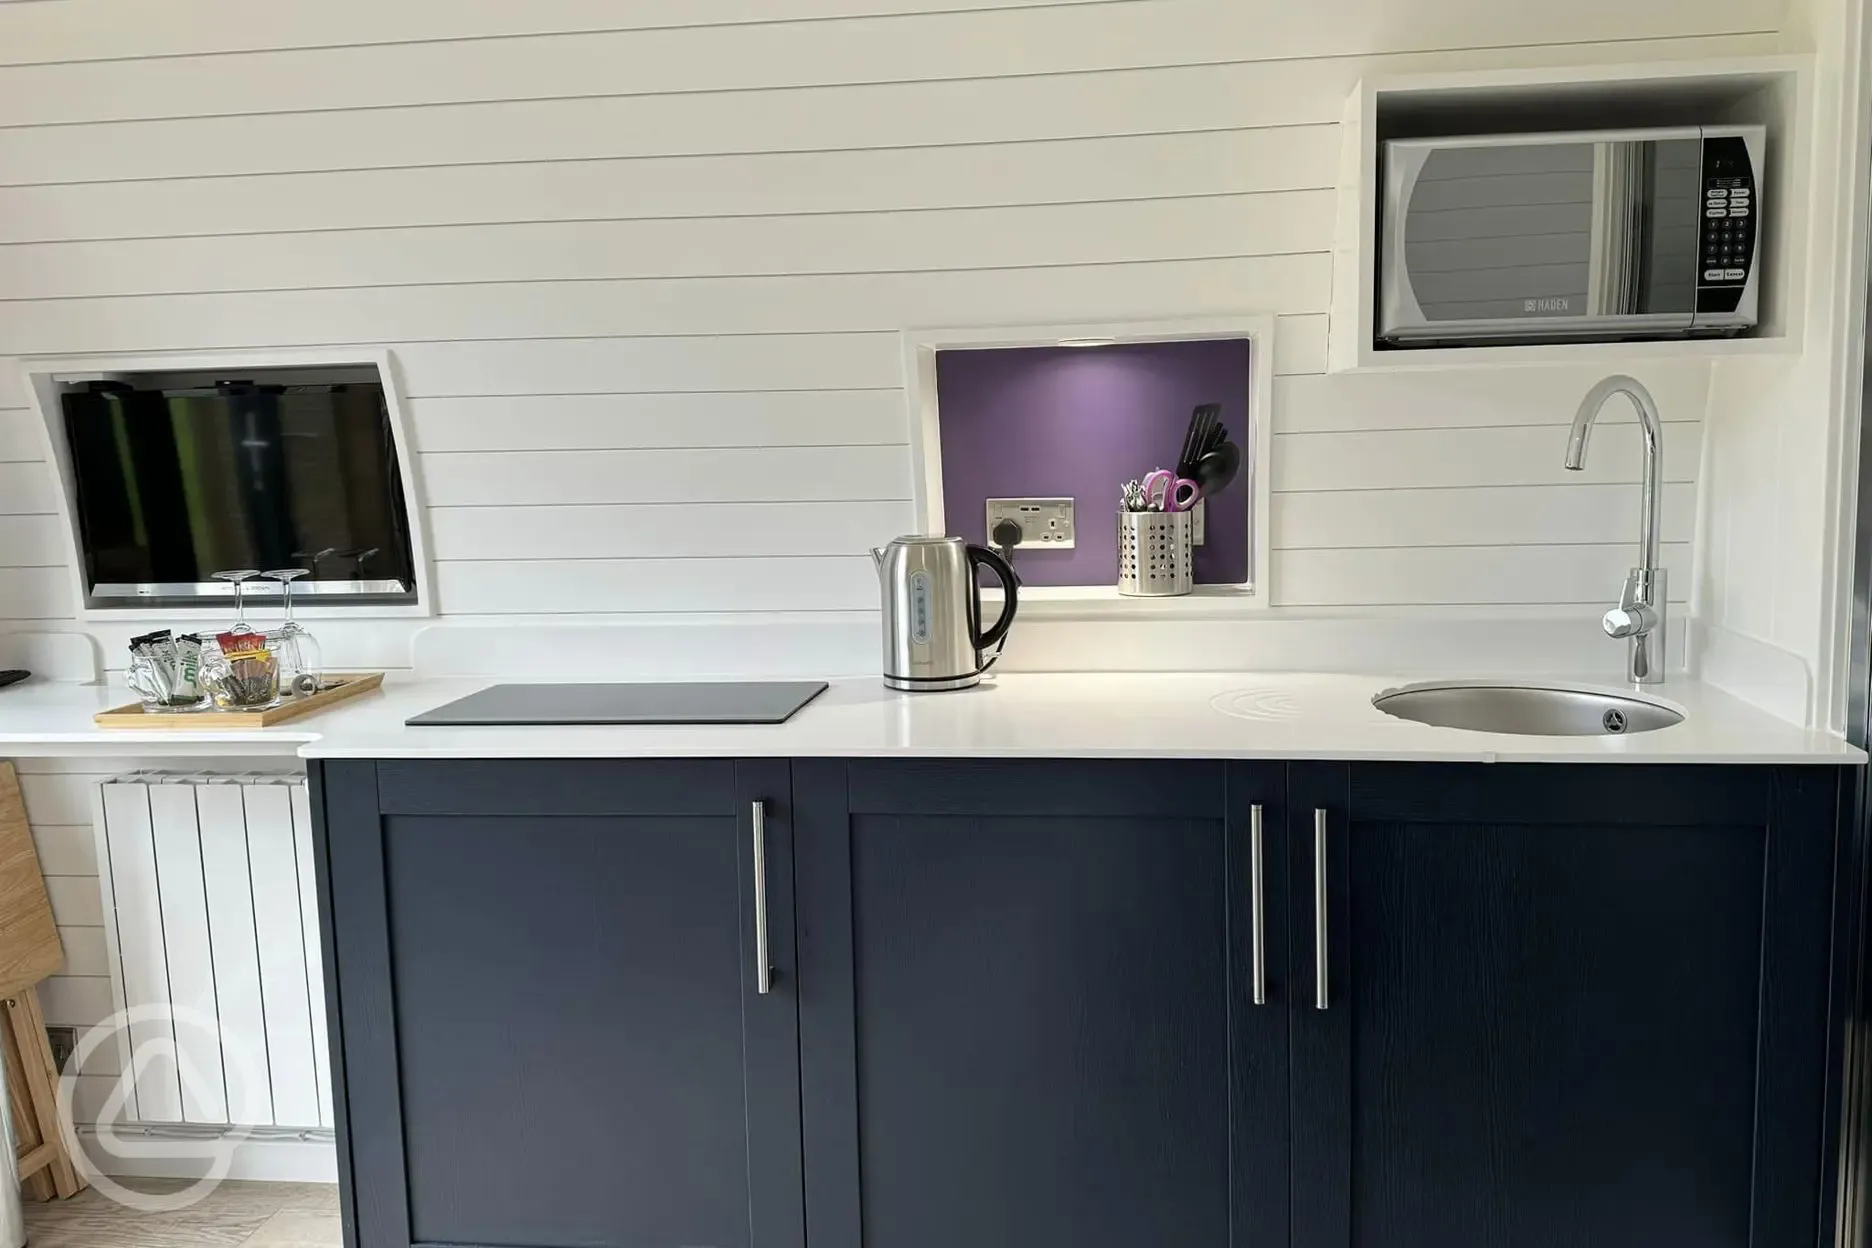 Glamping pod fully equipped kitchenette